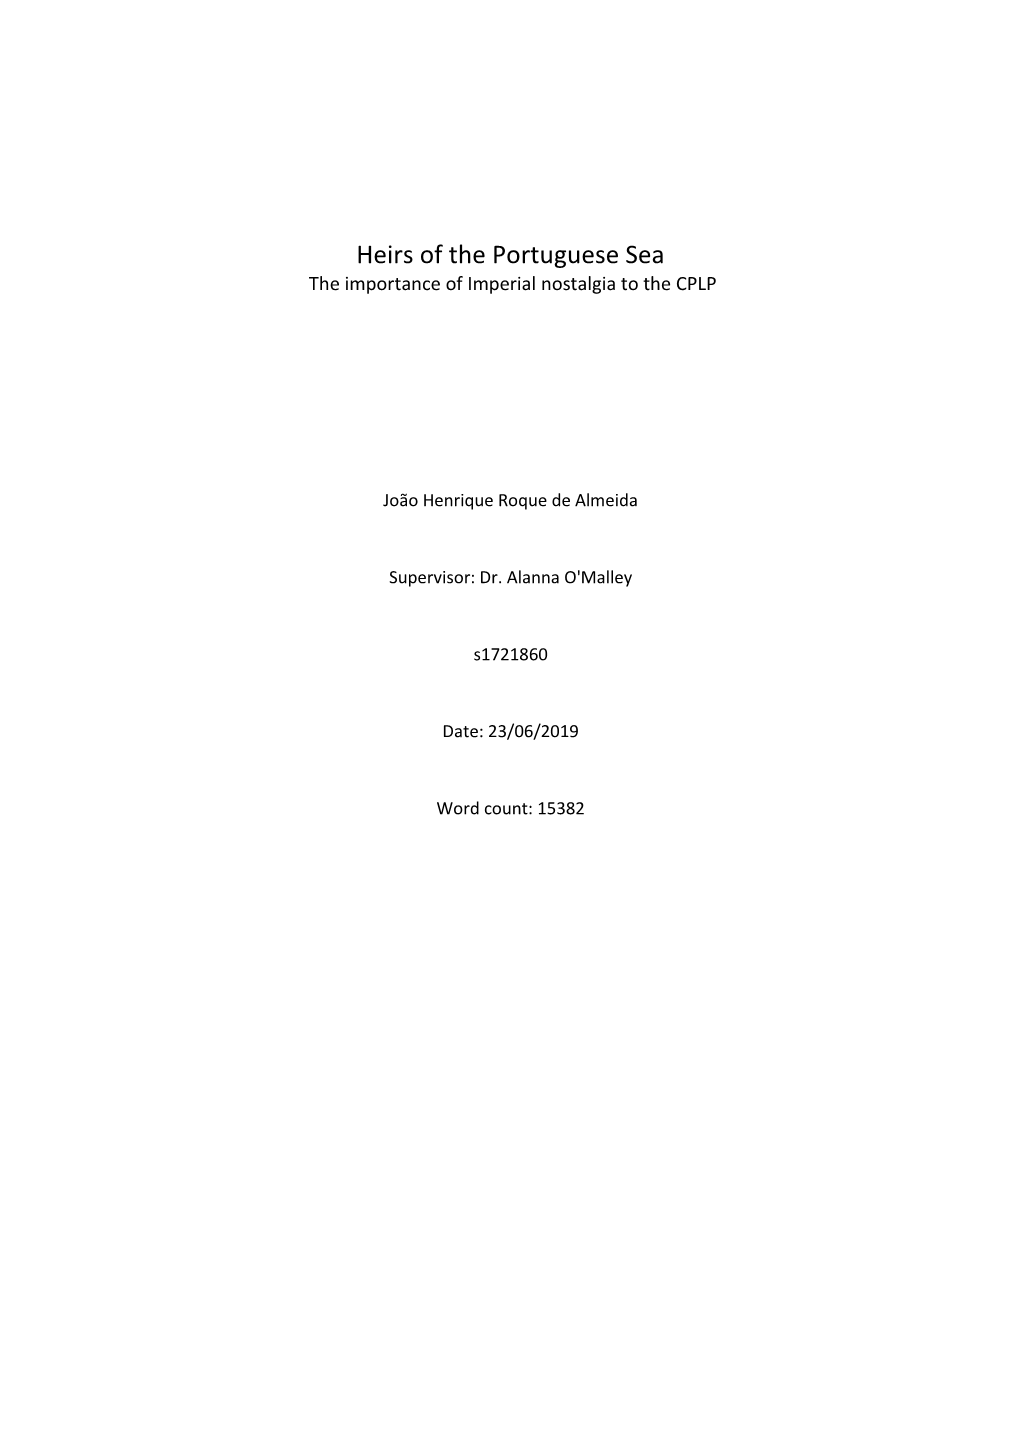 Heirs of the Portuguese Sea the Importance of Imperial Nostalgia to the CPLP